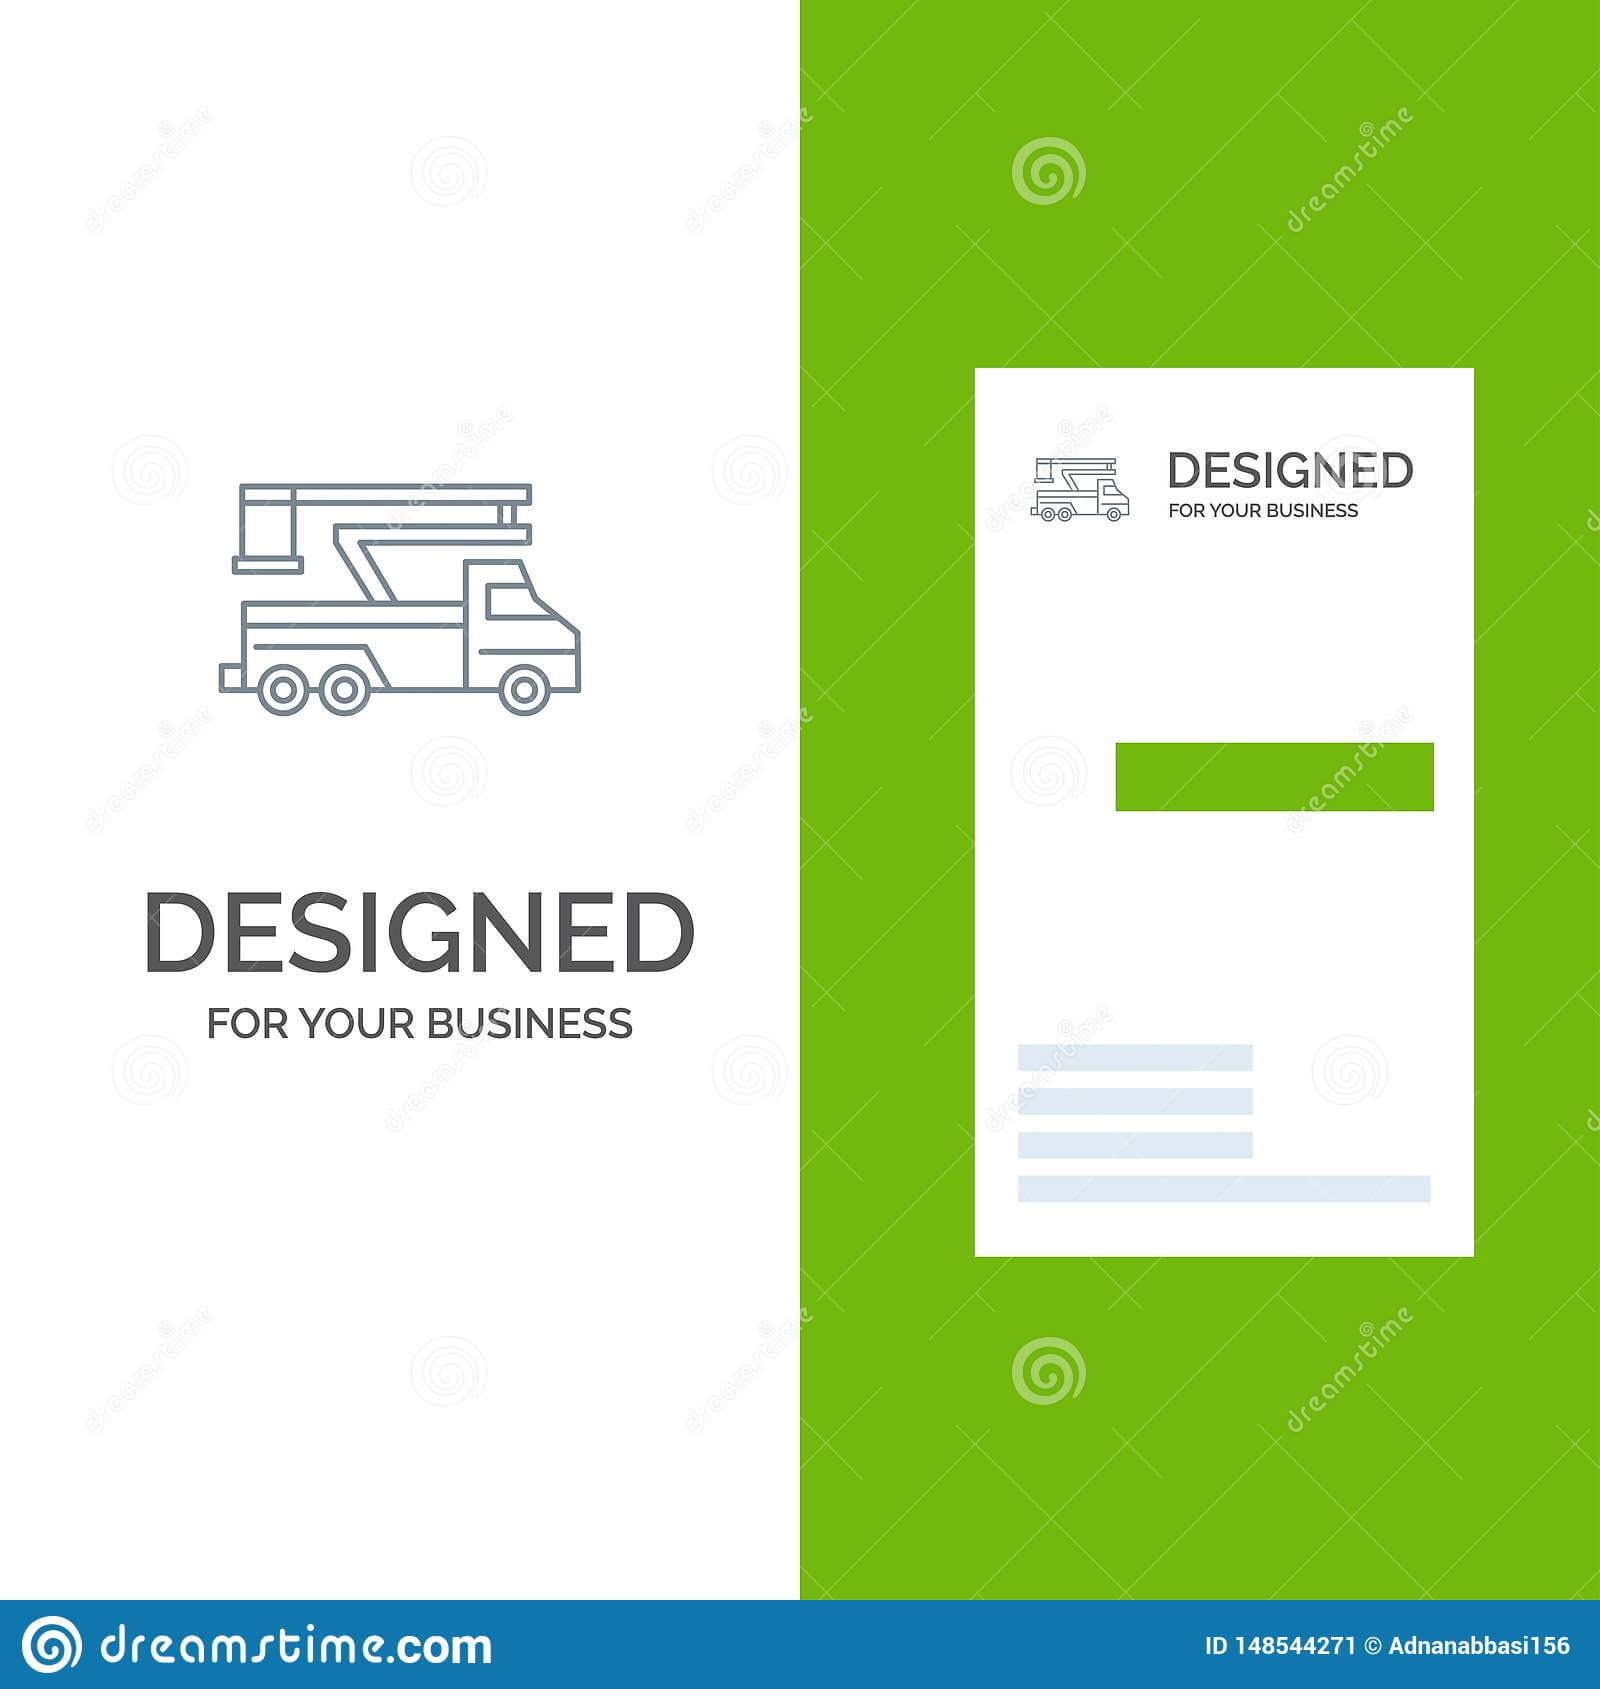 Crane, Truck, Lift, Lifting, Transport Grey Logo Design And Intended For Transport Business Cards Templates Free